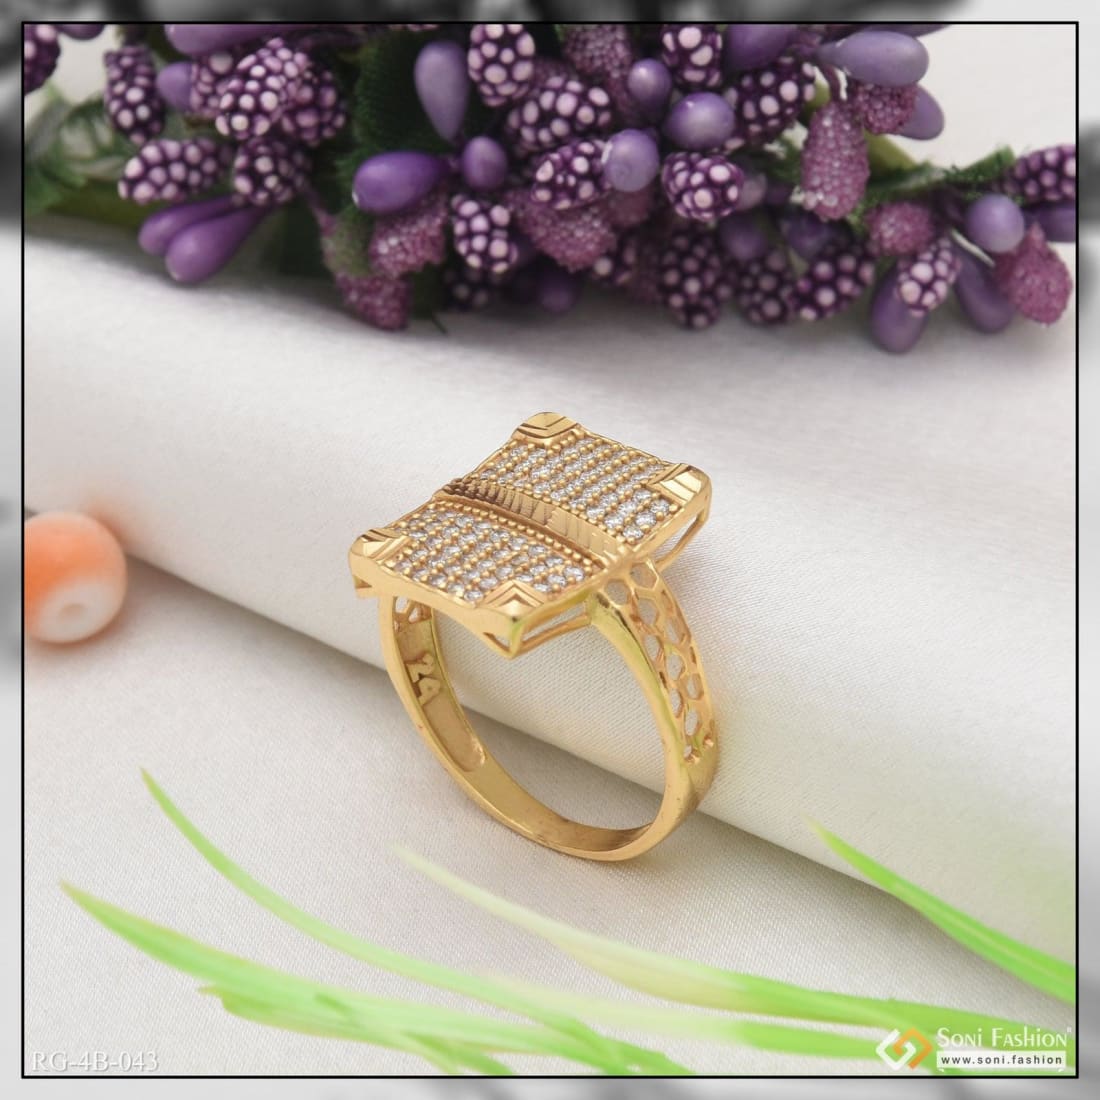 Buy PC Chandra 22K Gold Rings Online | Latest Designs at Best Price